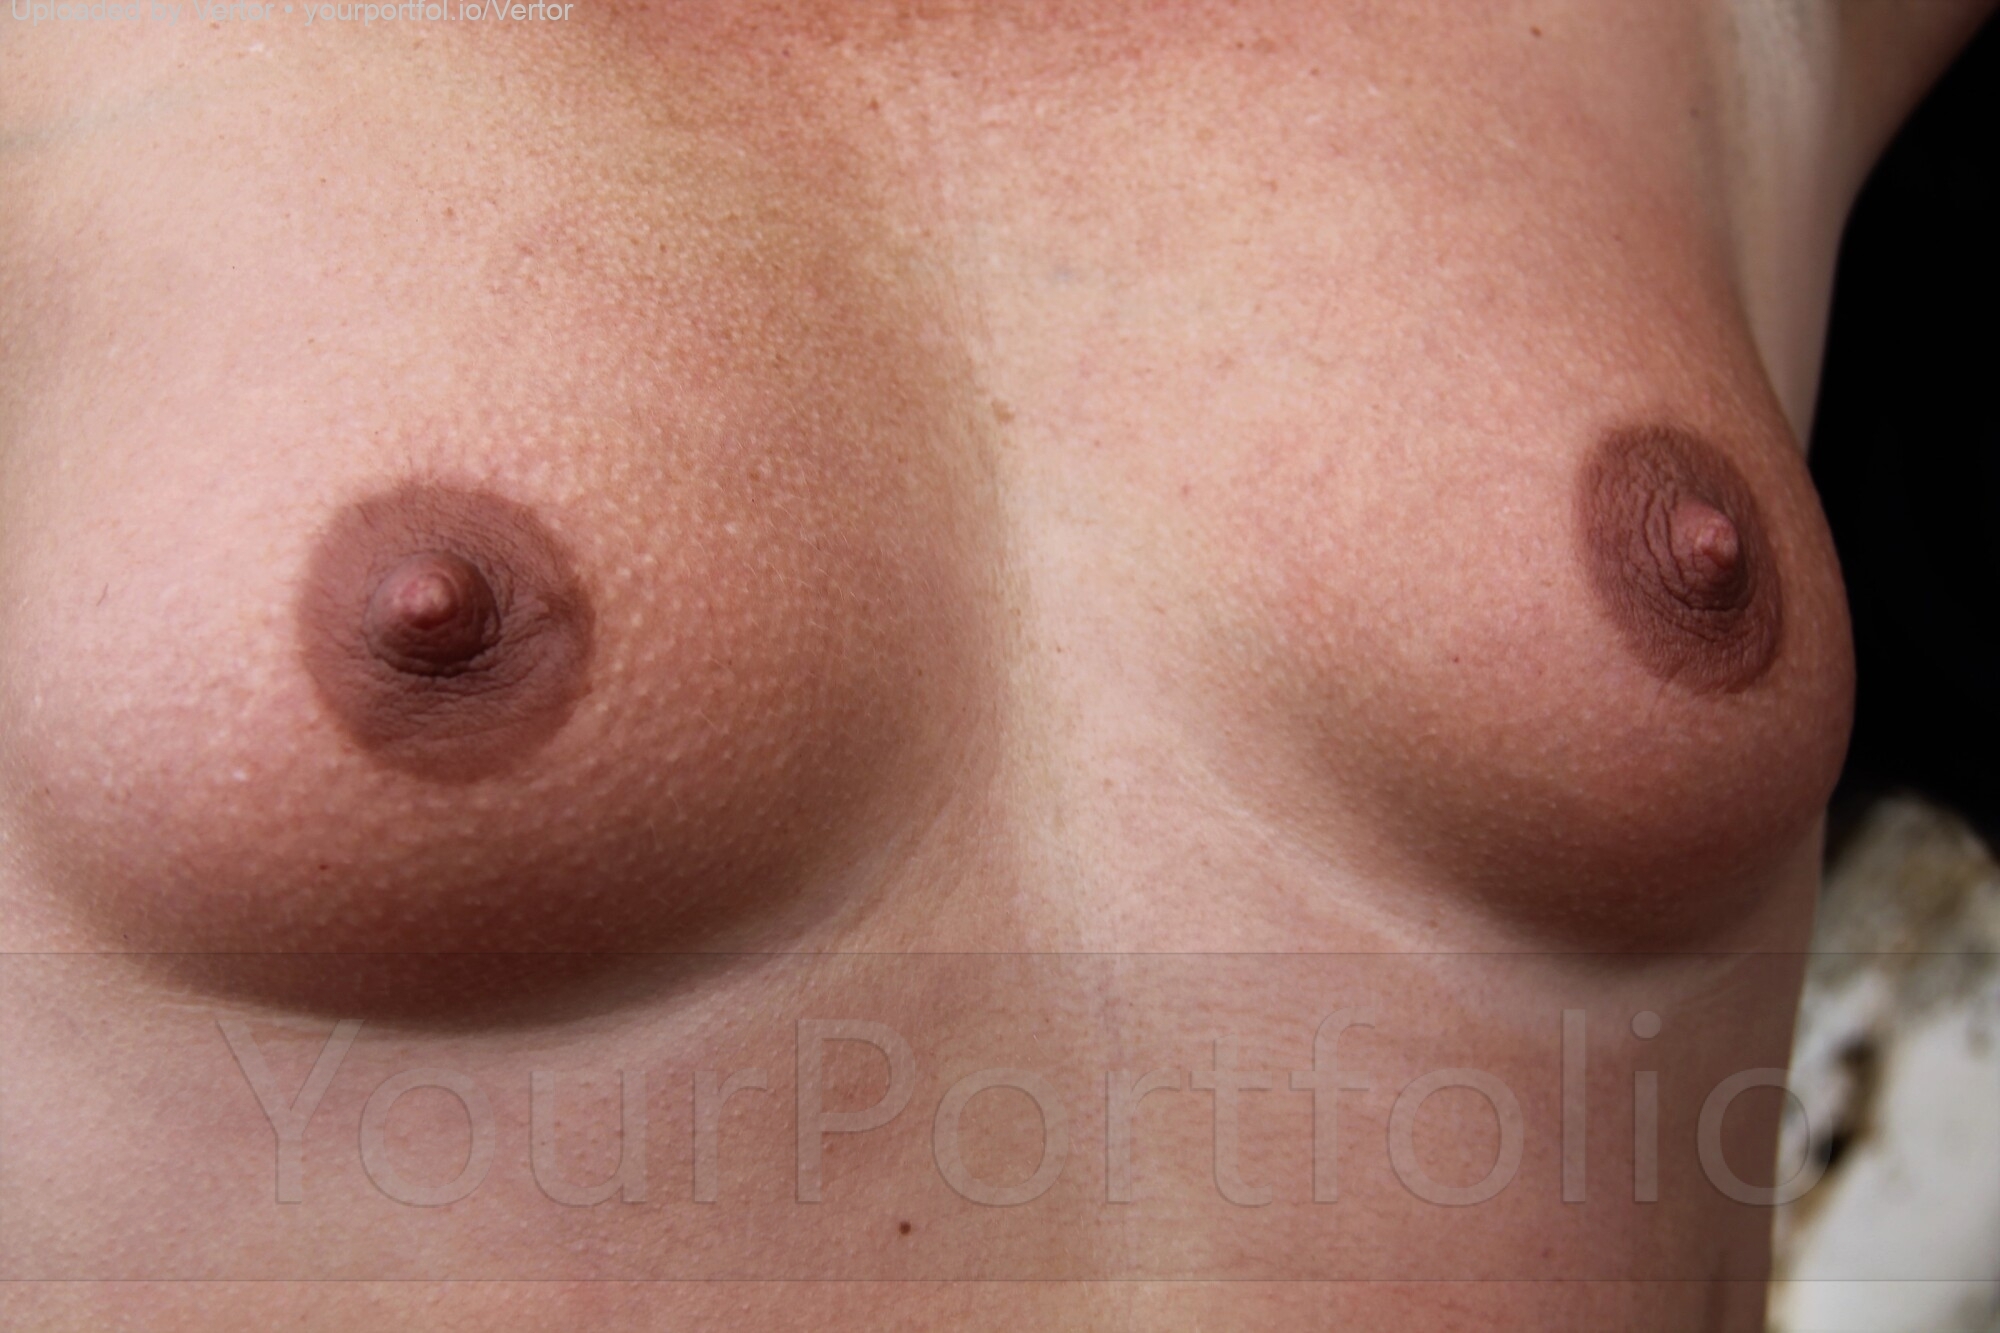 photographer Vertor body parts  photo taken at Tyne and Wear